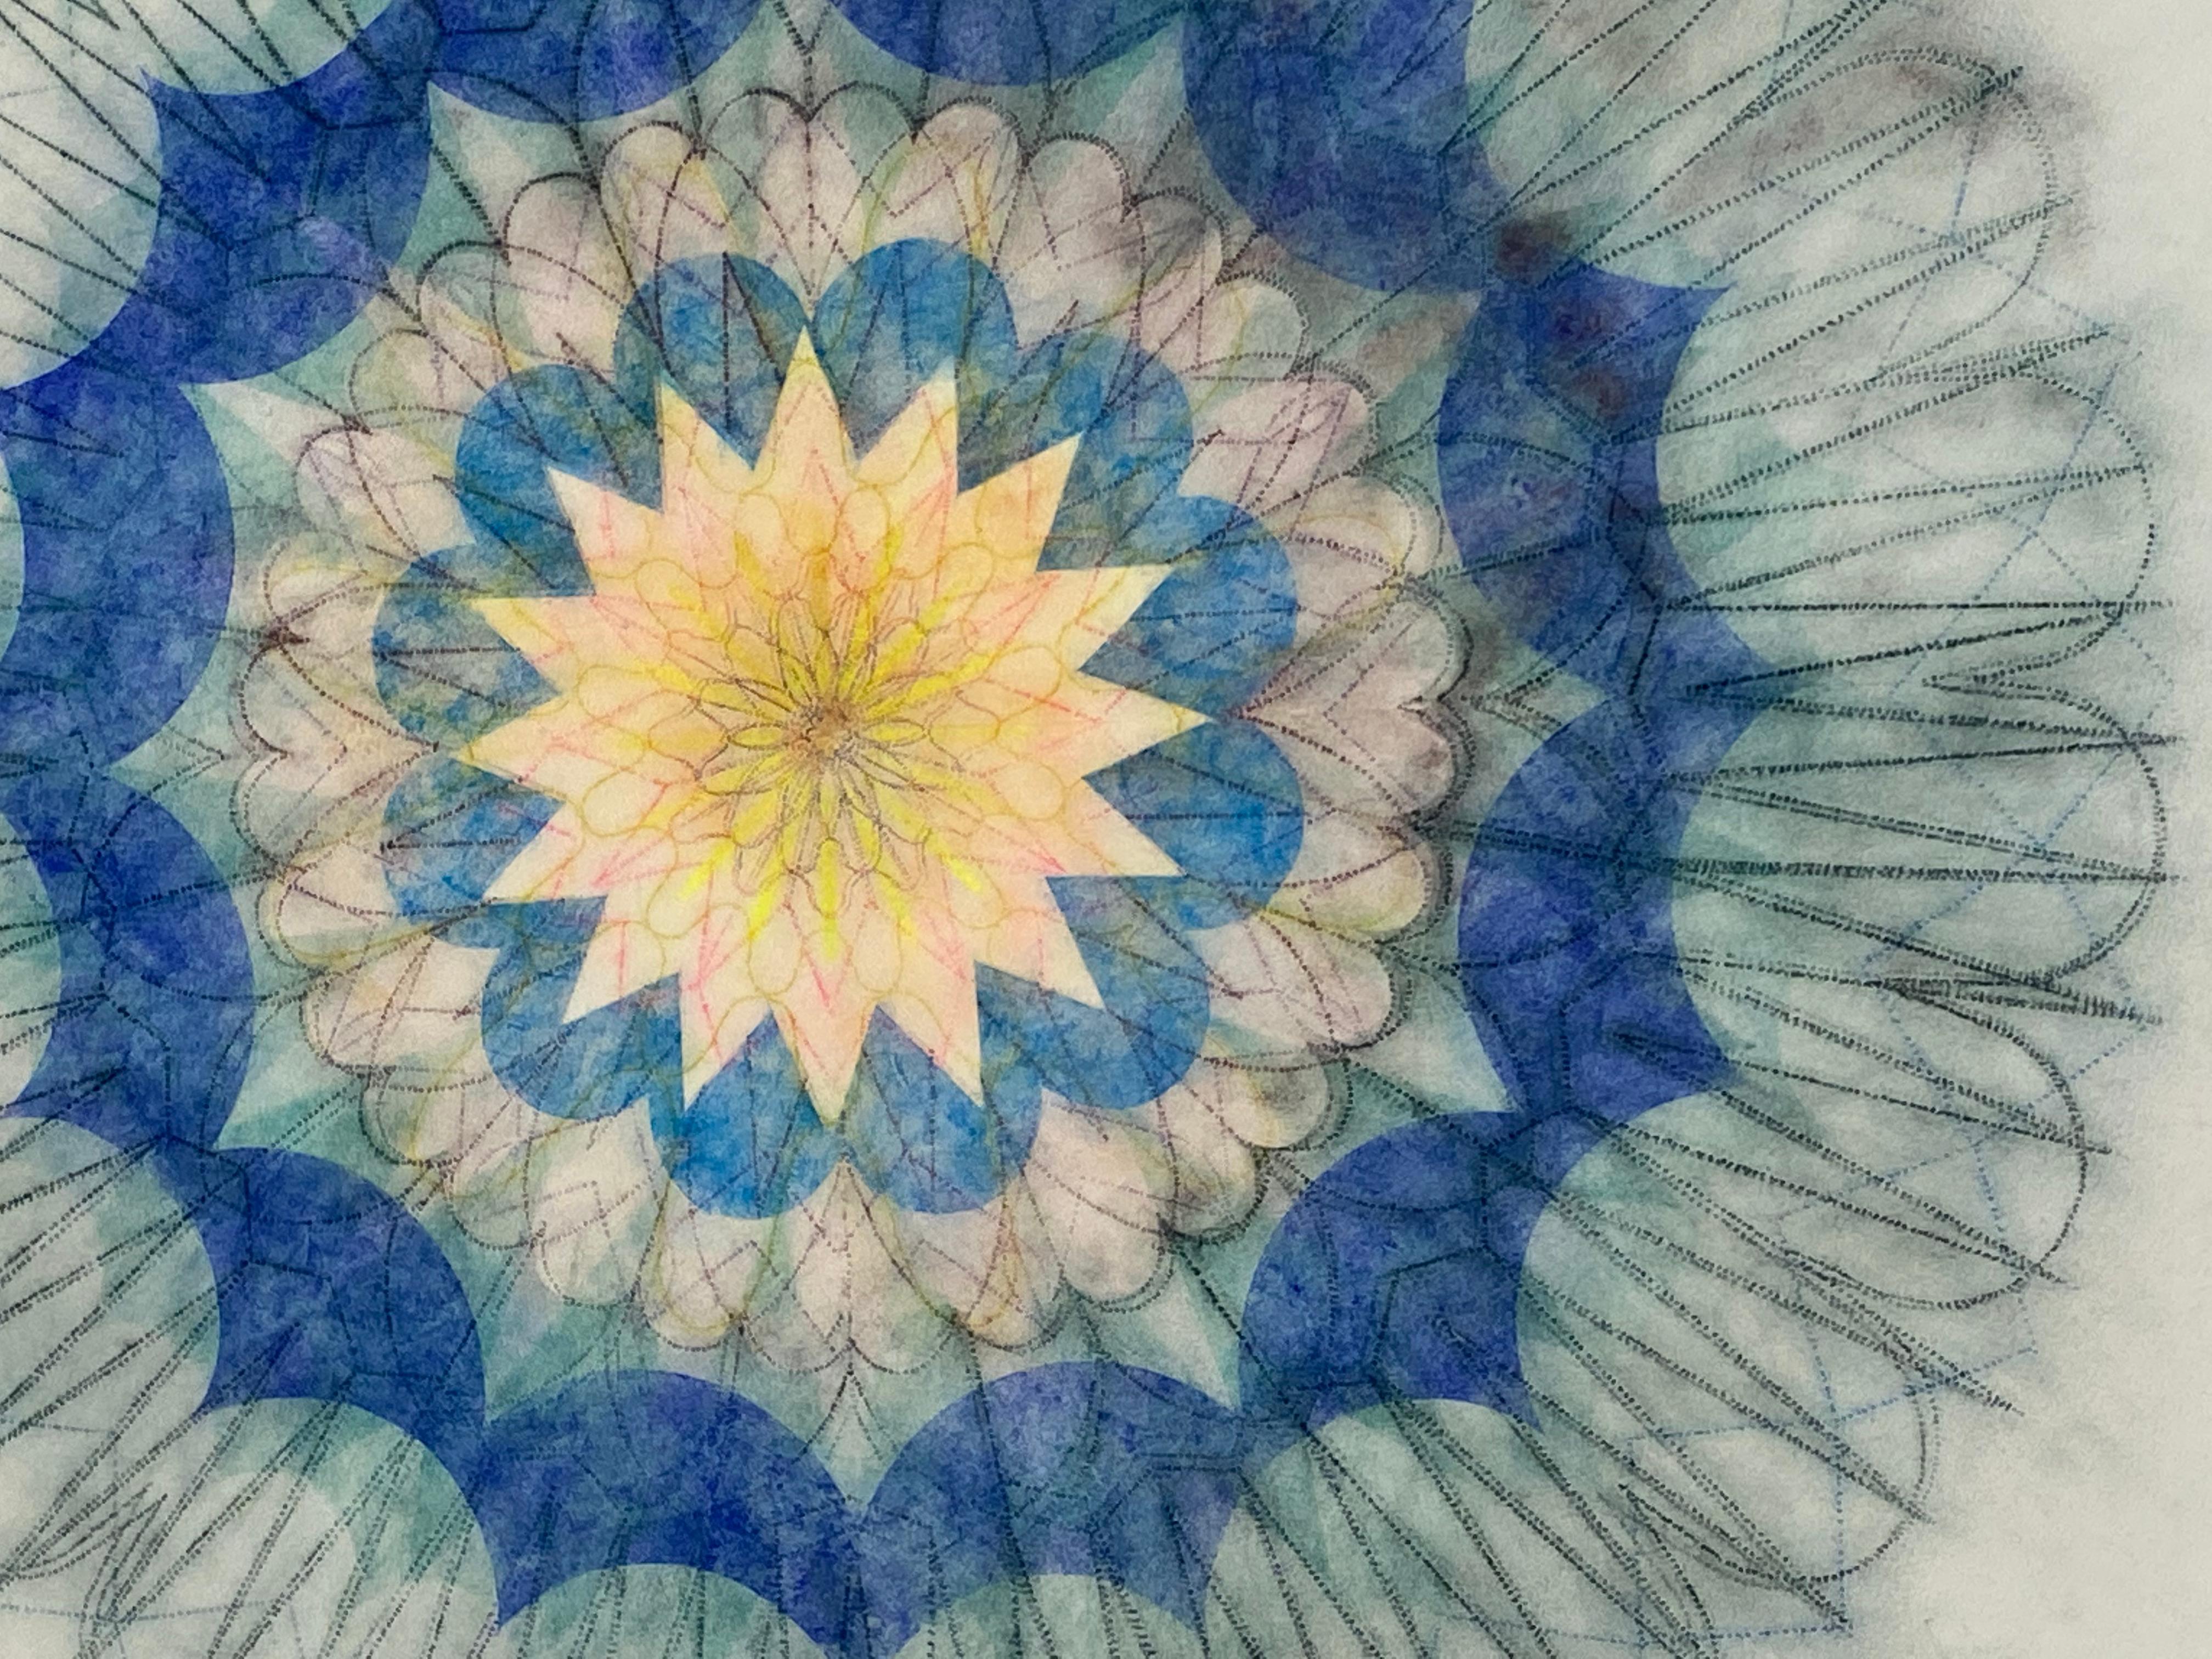 This multicolored drawing has a beautiful, soft mottled texture created with Judge's unique powered pigment technique. Primavera Pop 14 is a predominately navy blue and teal green geometric flower mandala shape with bright yellow and pink at the